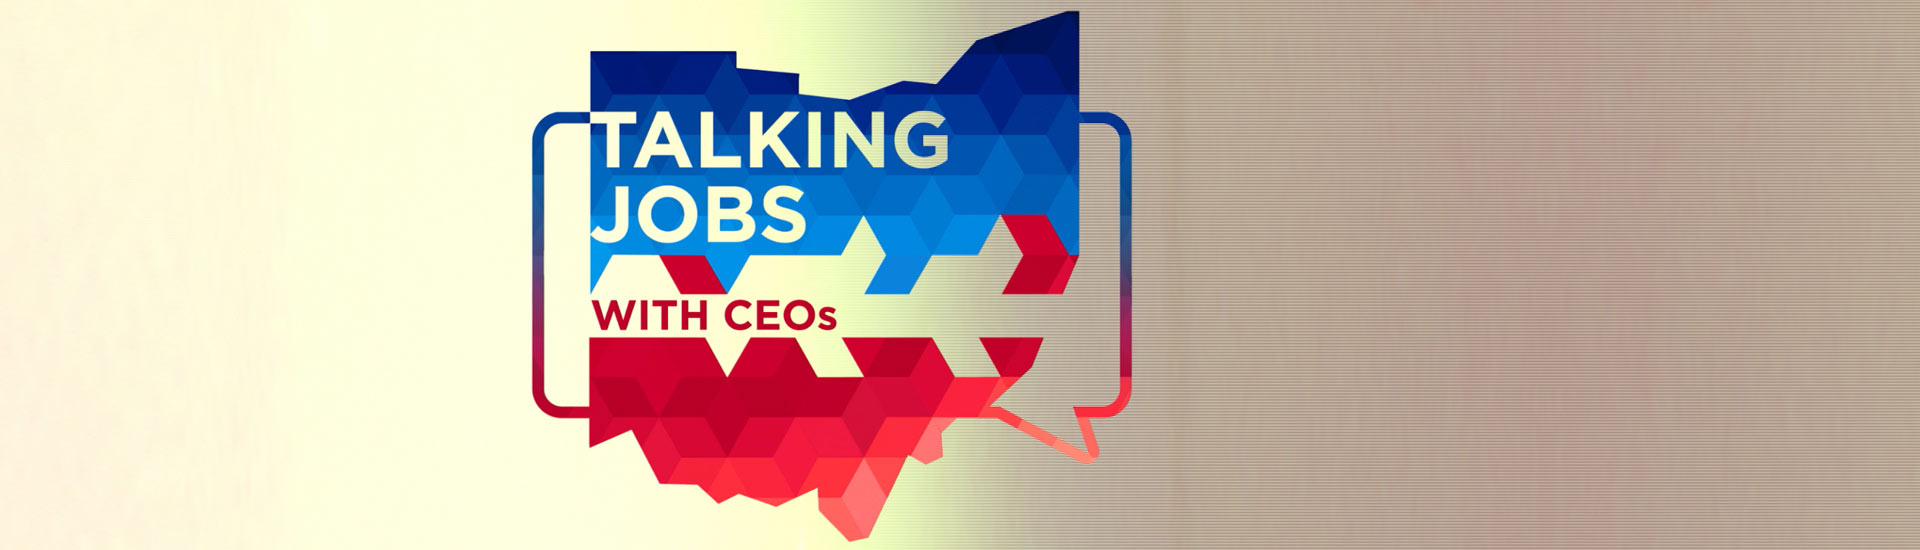 Talking Jobs With CEOs